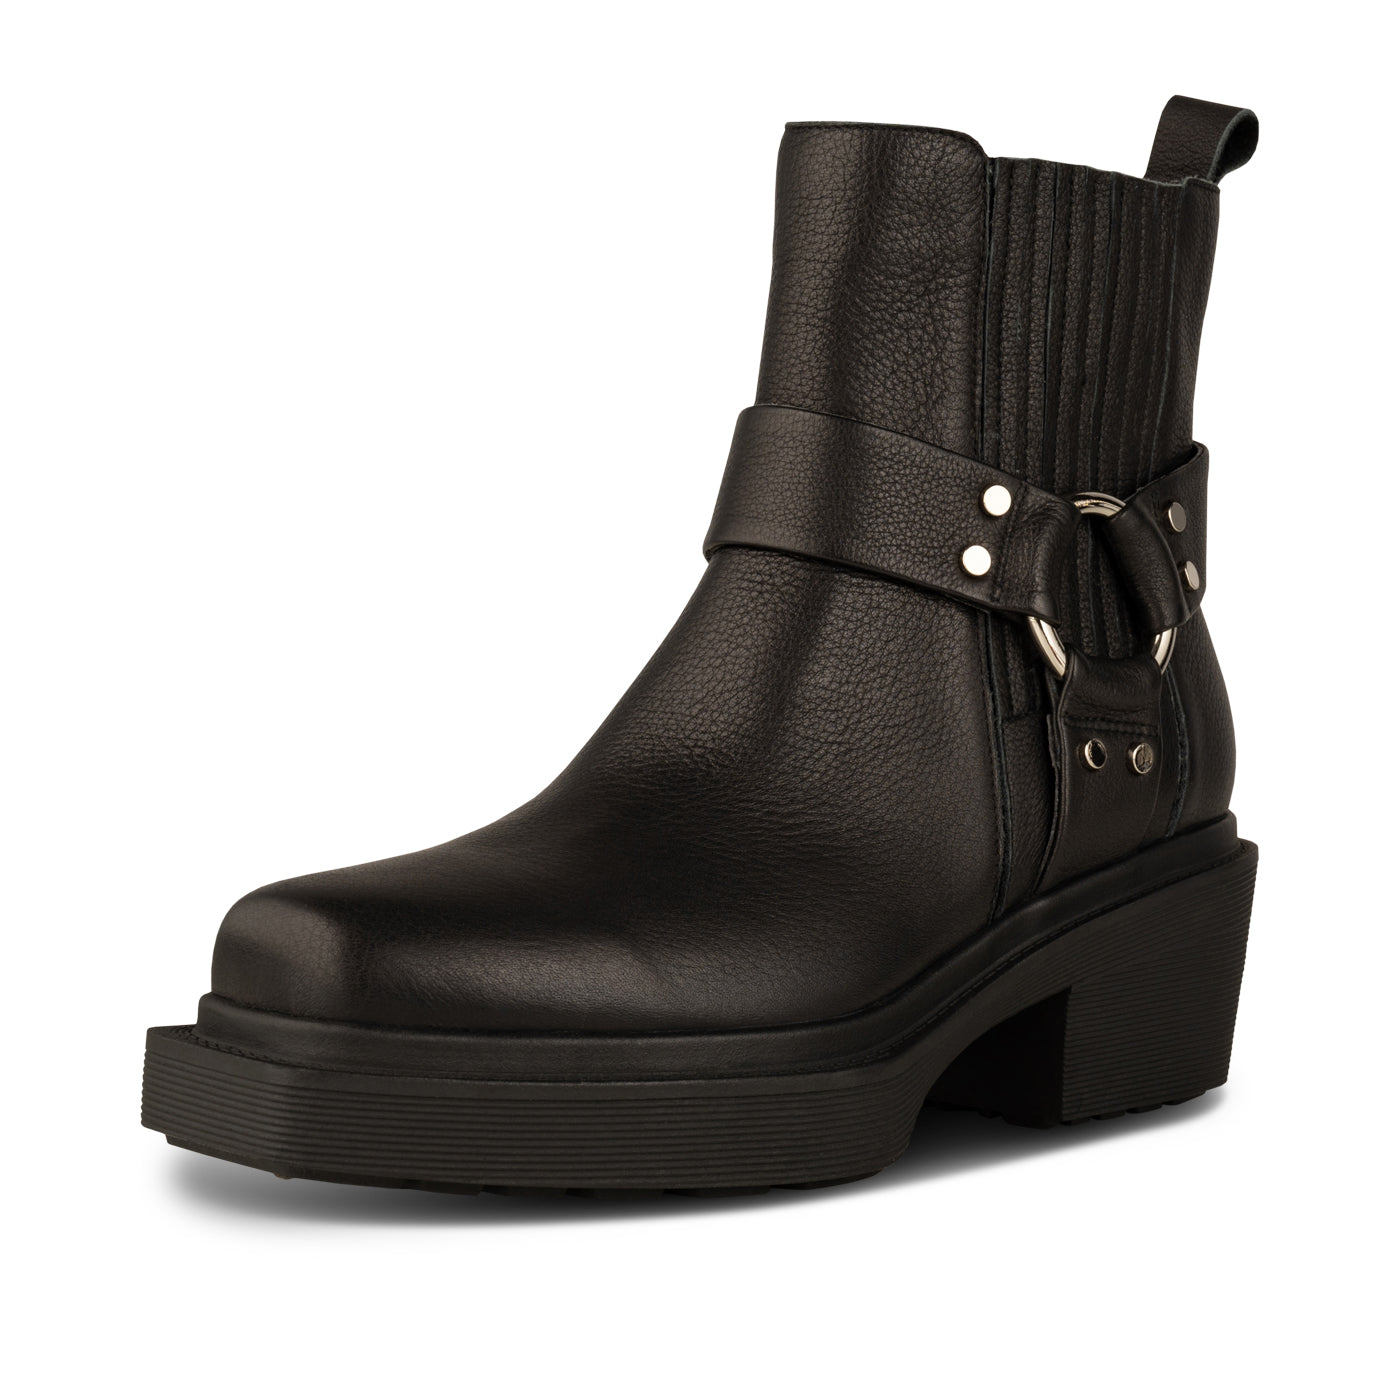 SHOE THE BEAR WOMENS STB-Amina Harness Ankle Boots 020 Black